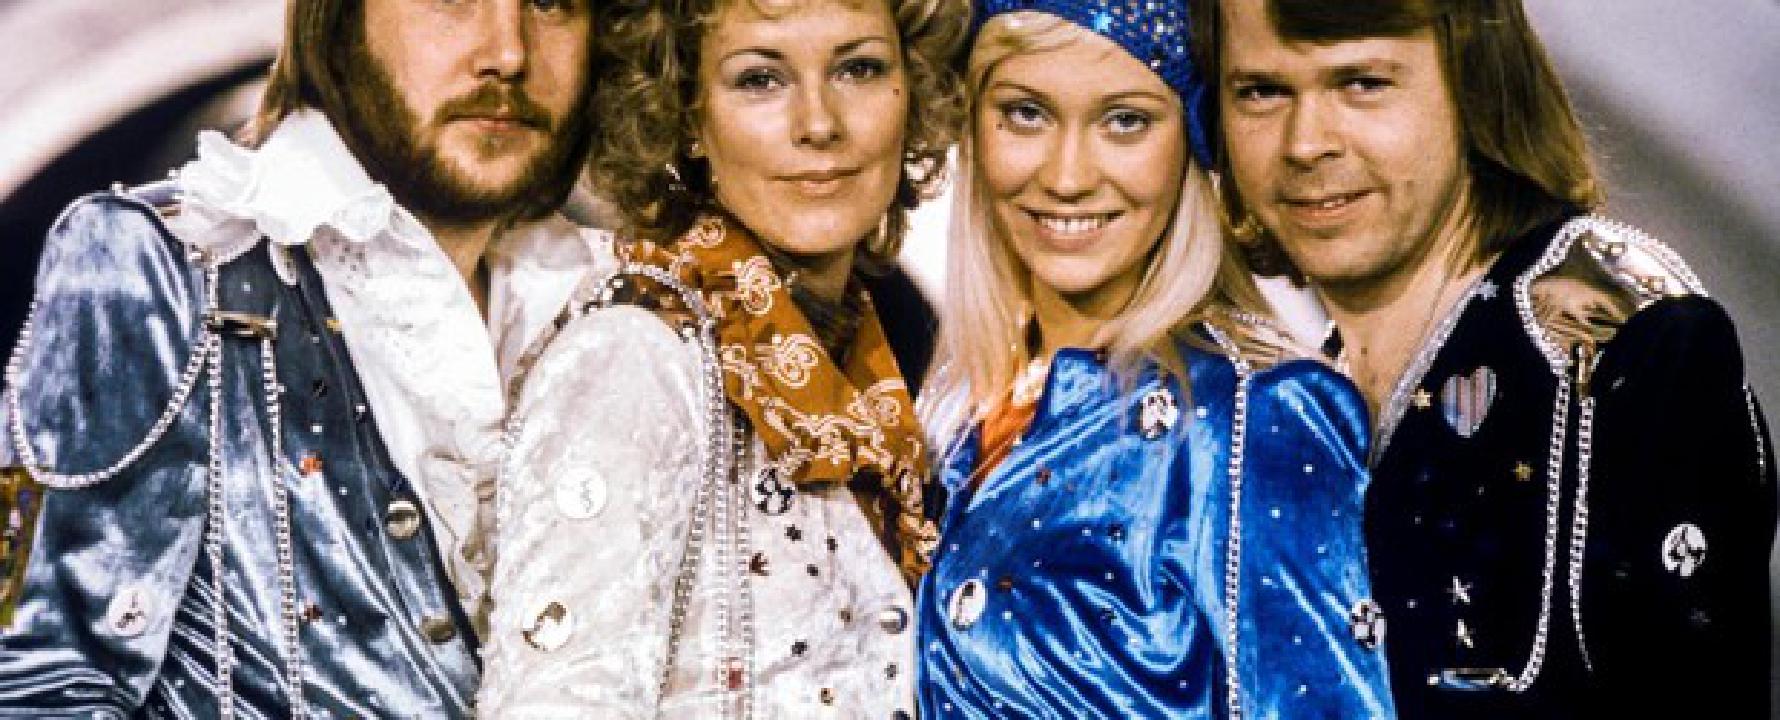 Promotional photograph of ABBA.